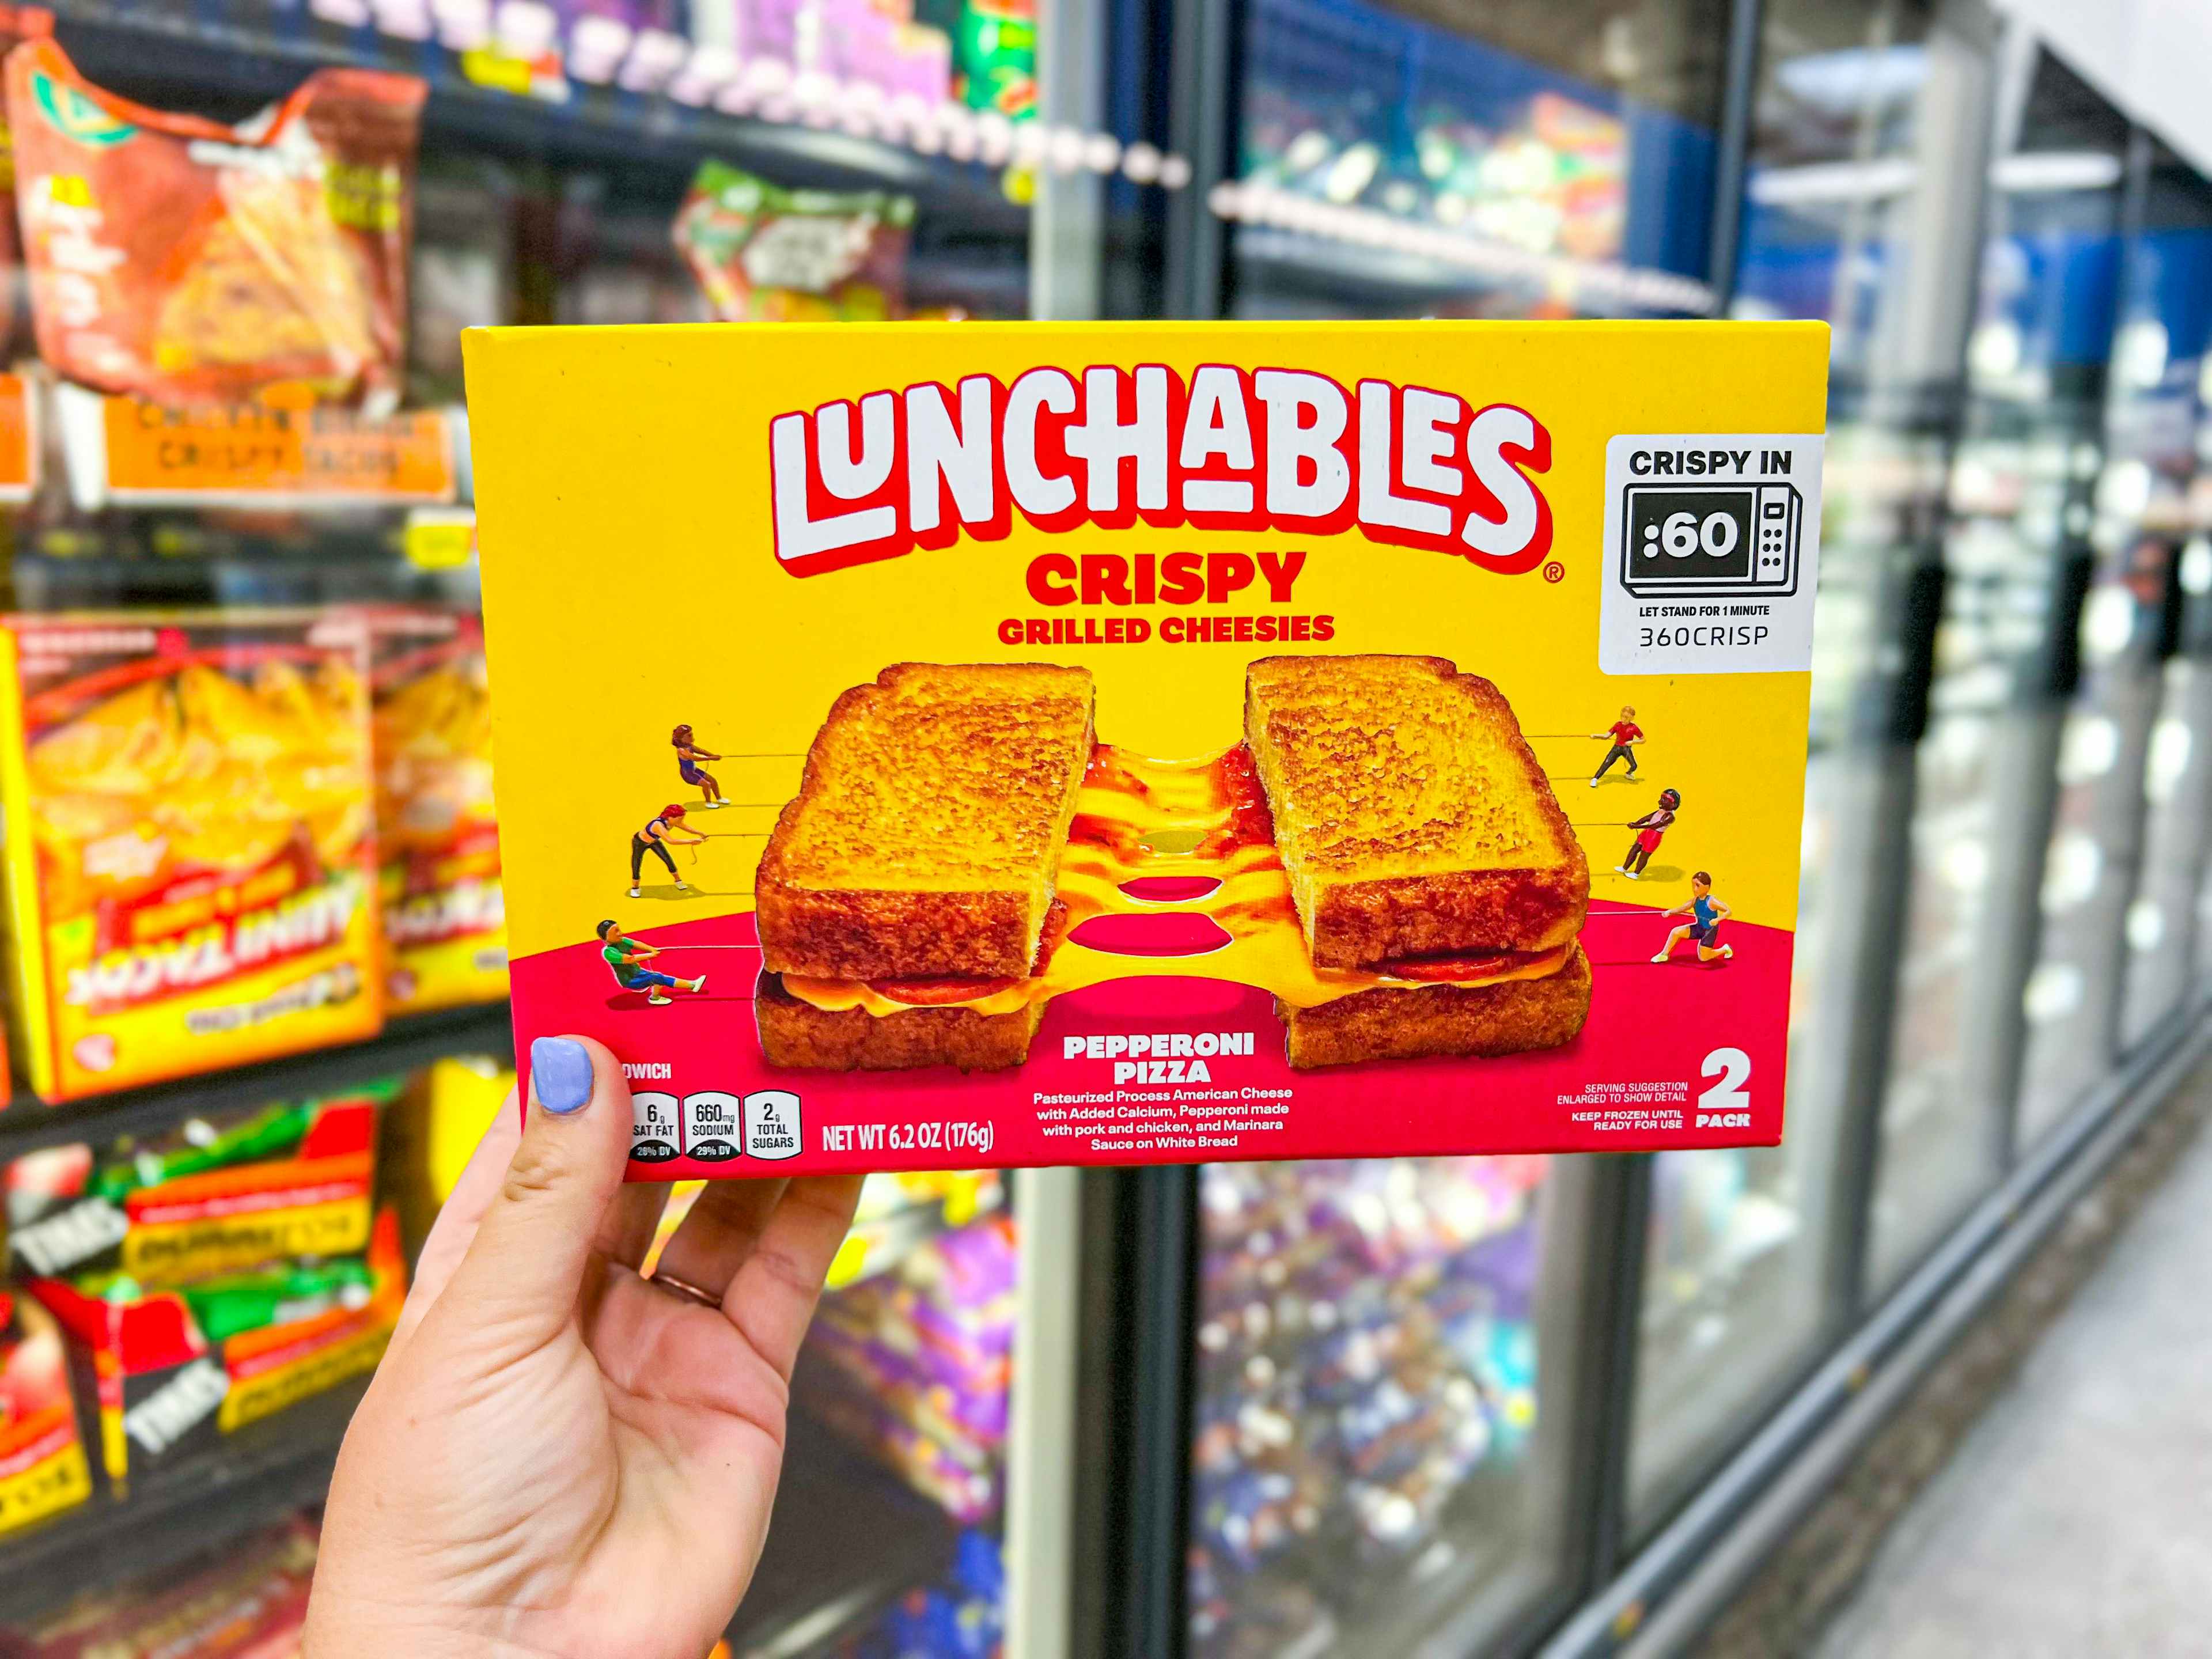 hand holding lunchables grilled cheesies box in walmart aisle